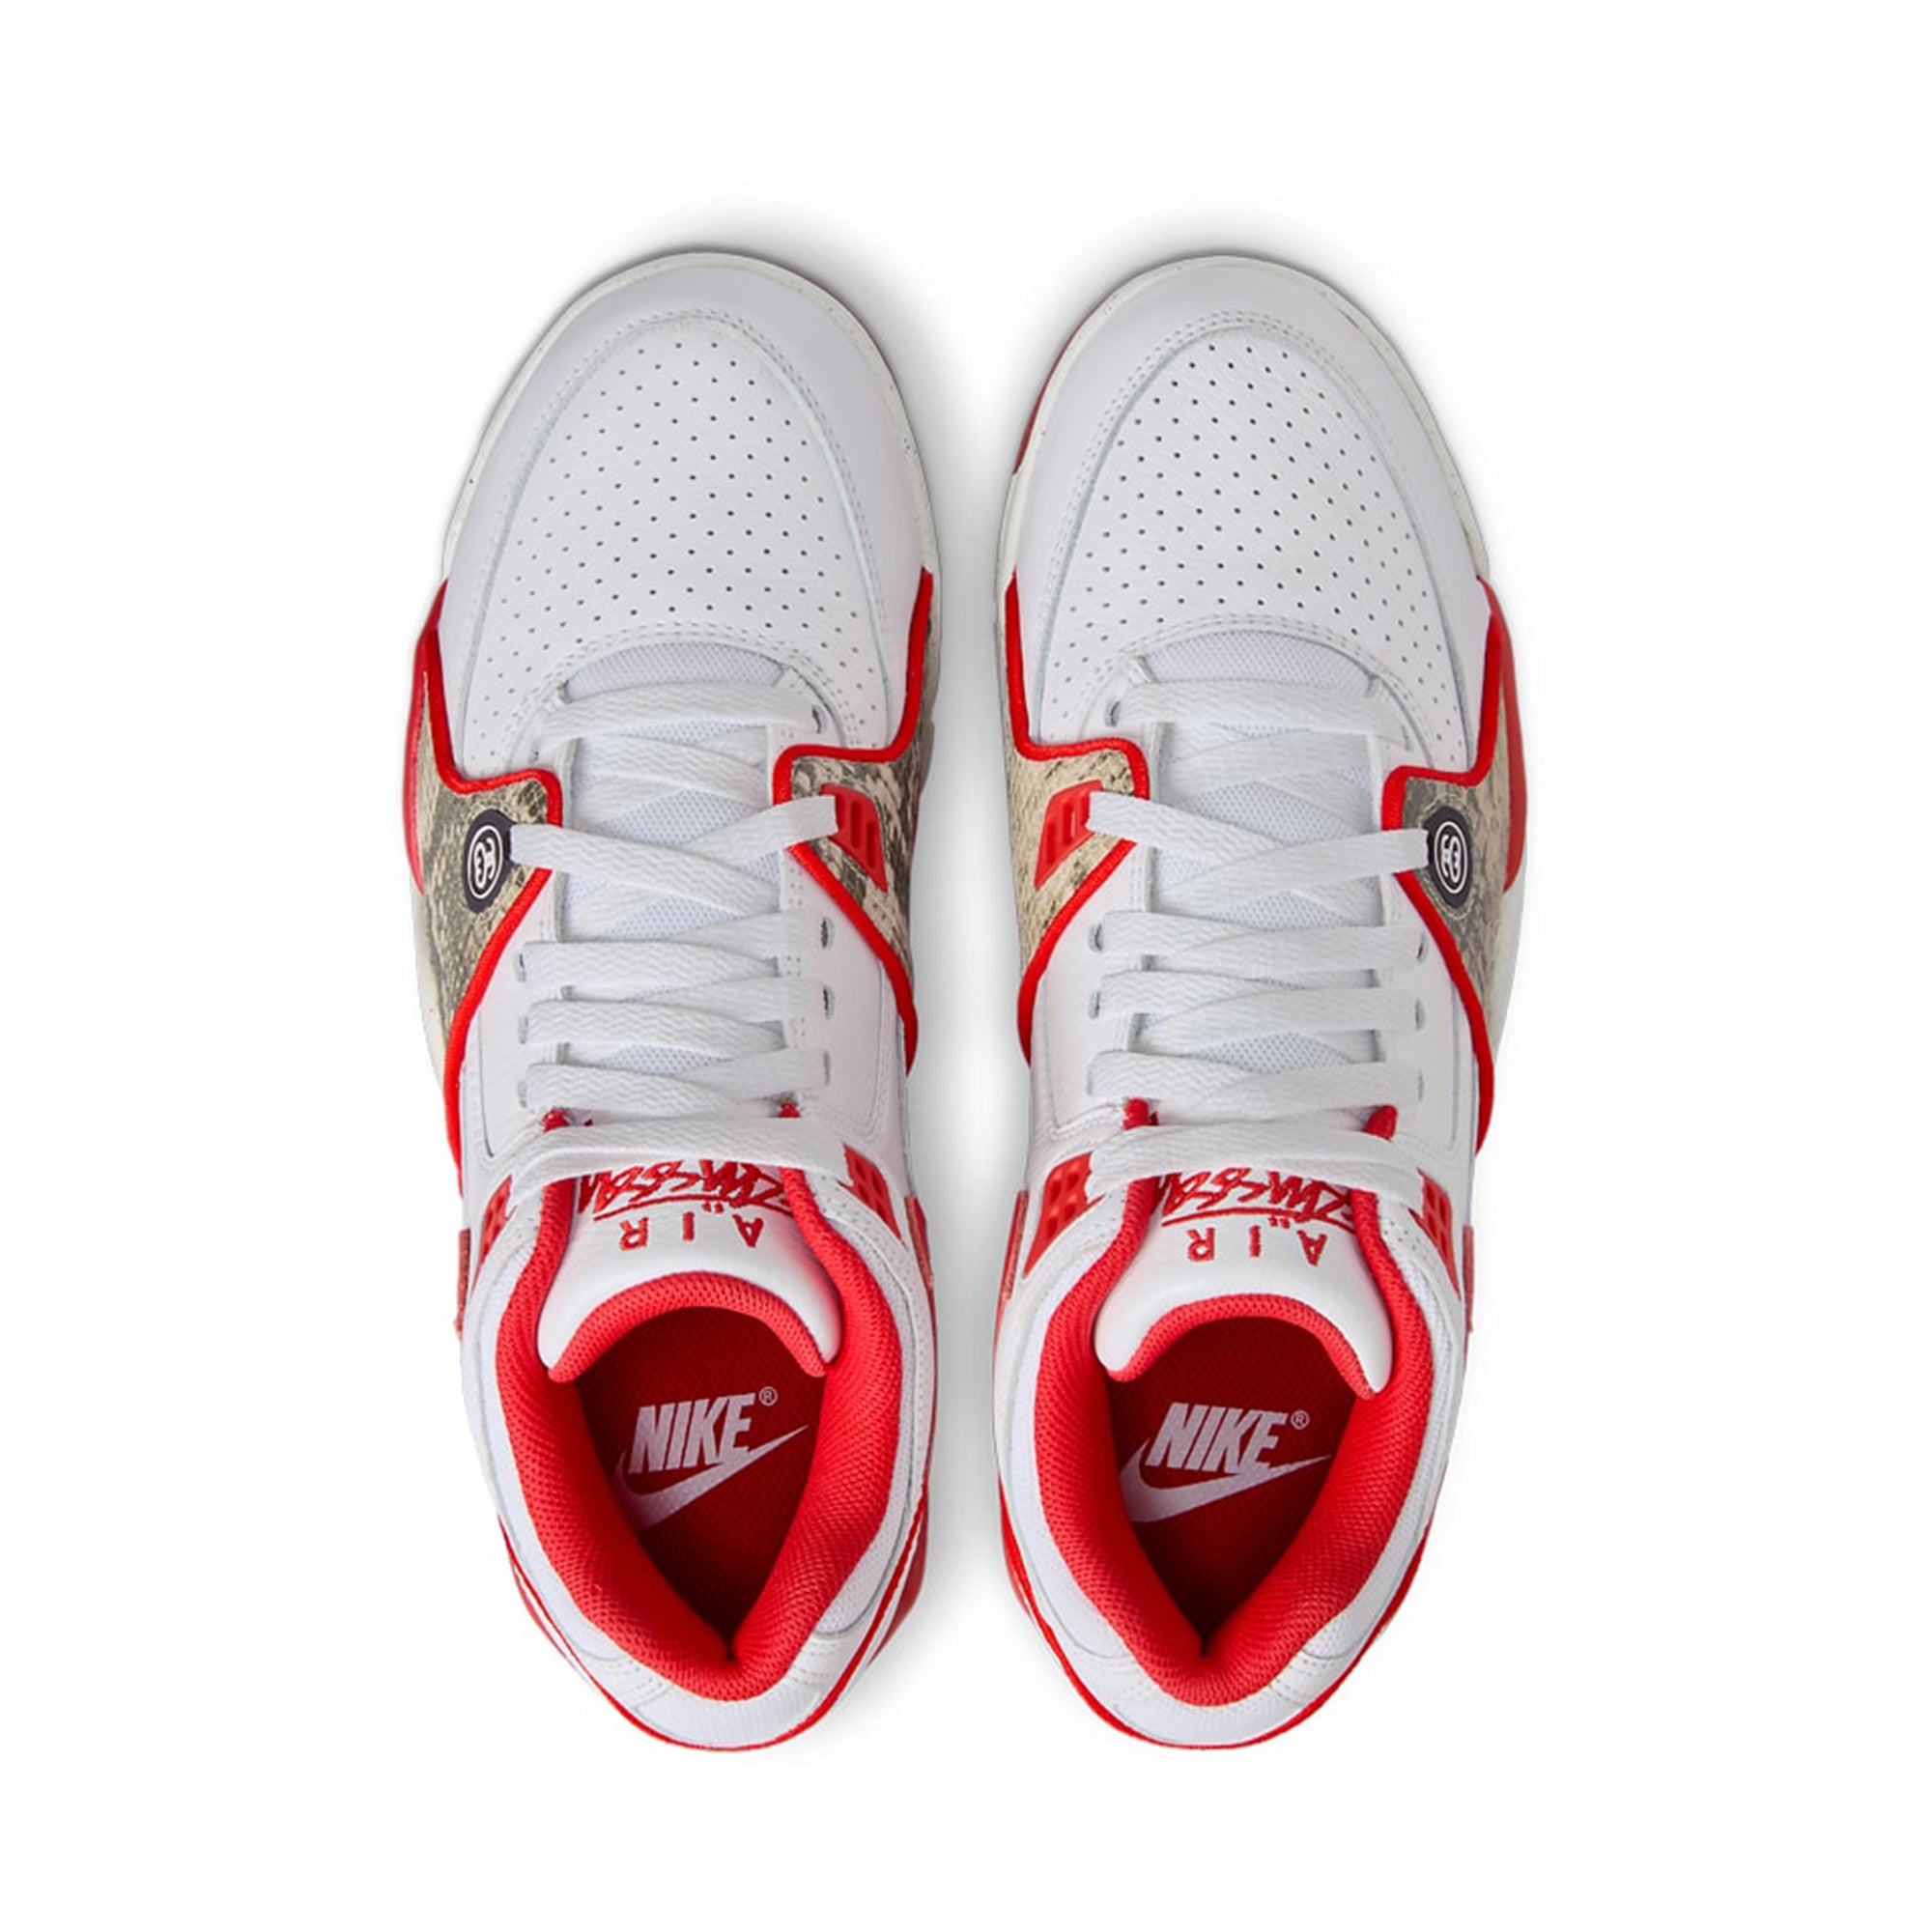 NIKE - Stüssy Men's Air Flight '89 Low SP - (White/Red) view 4